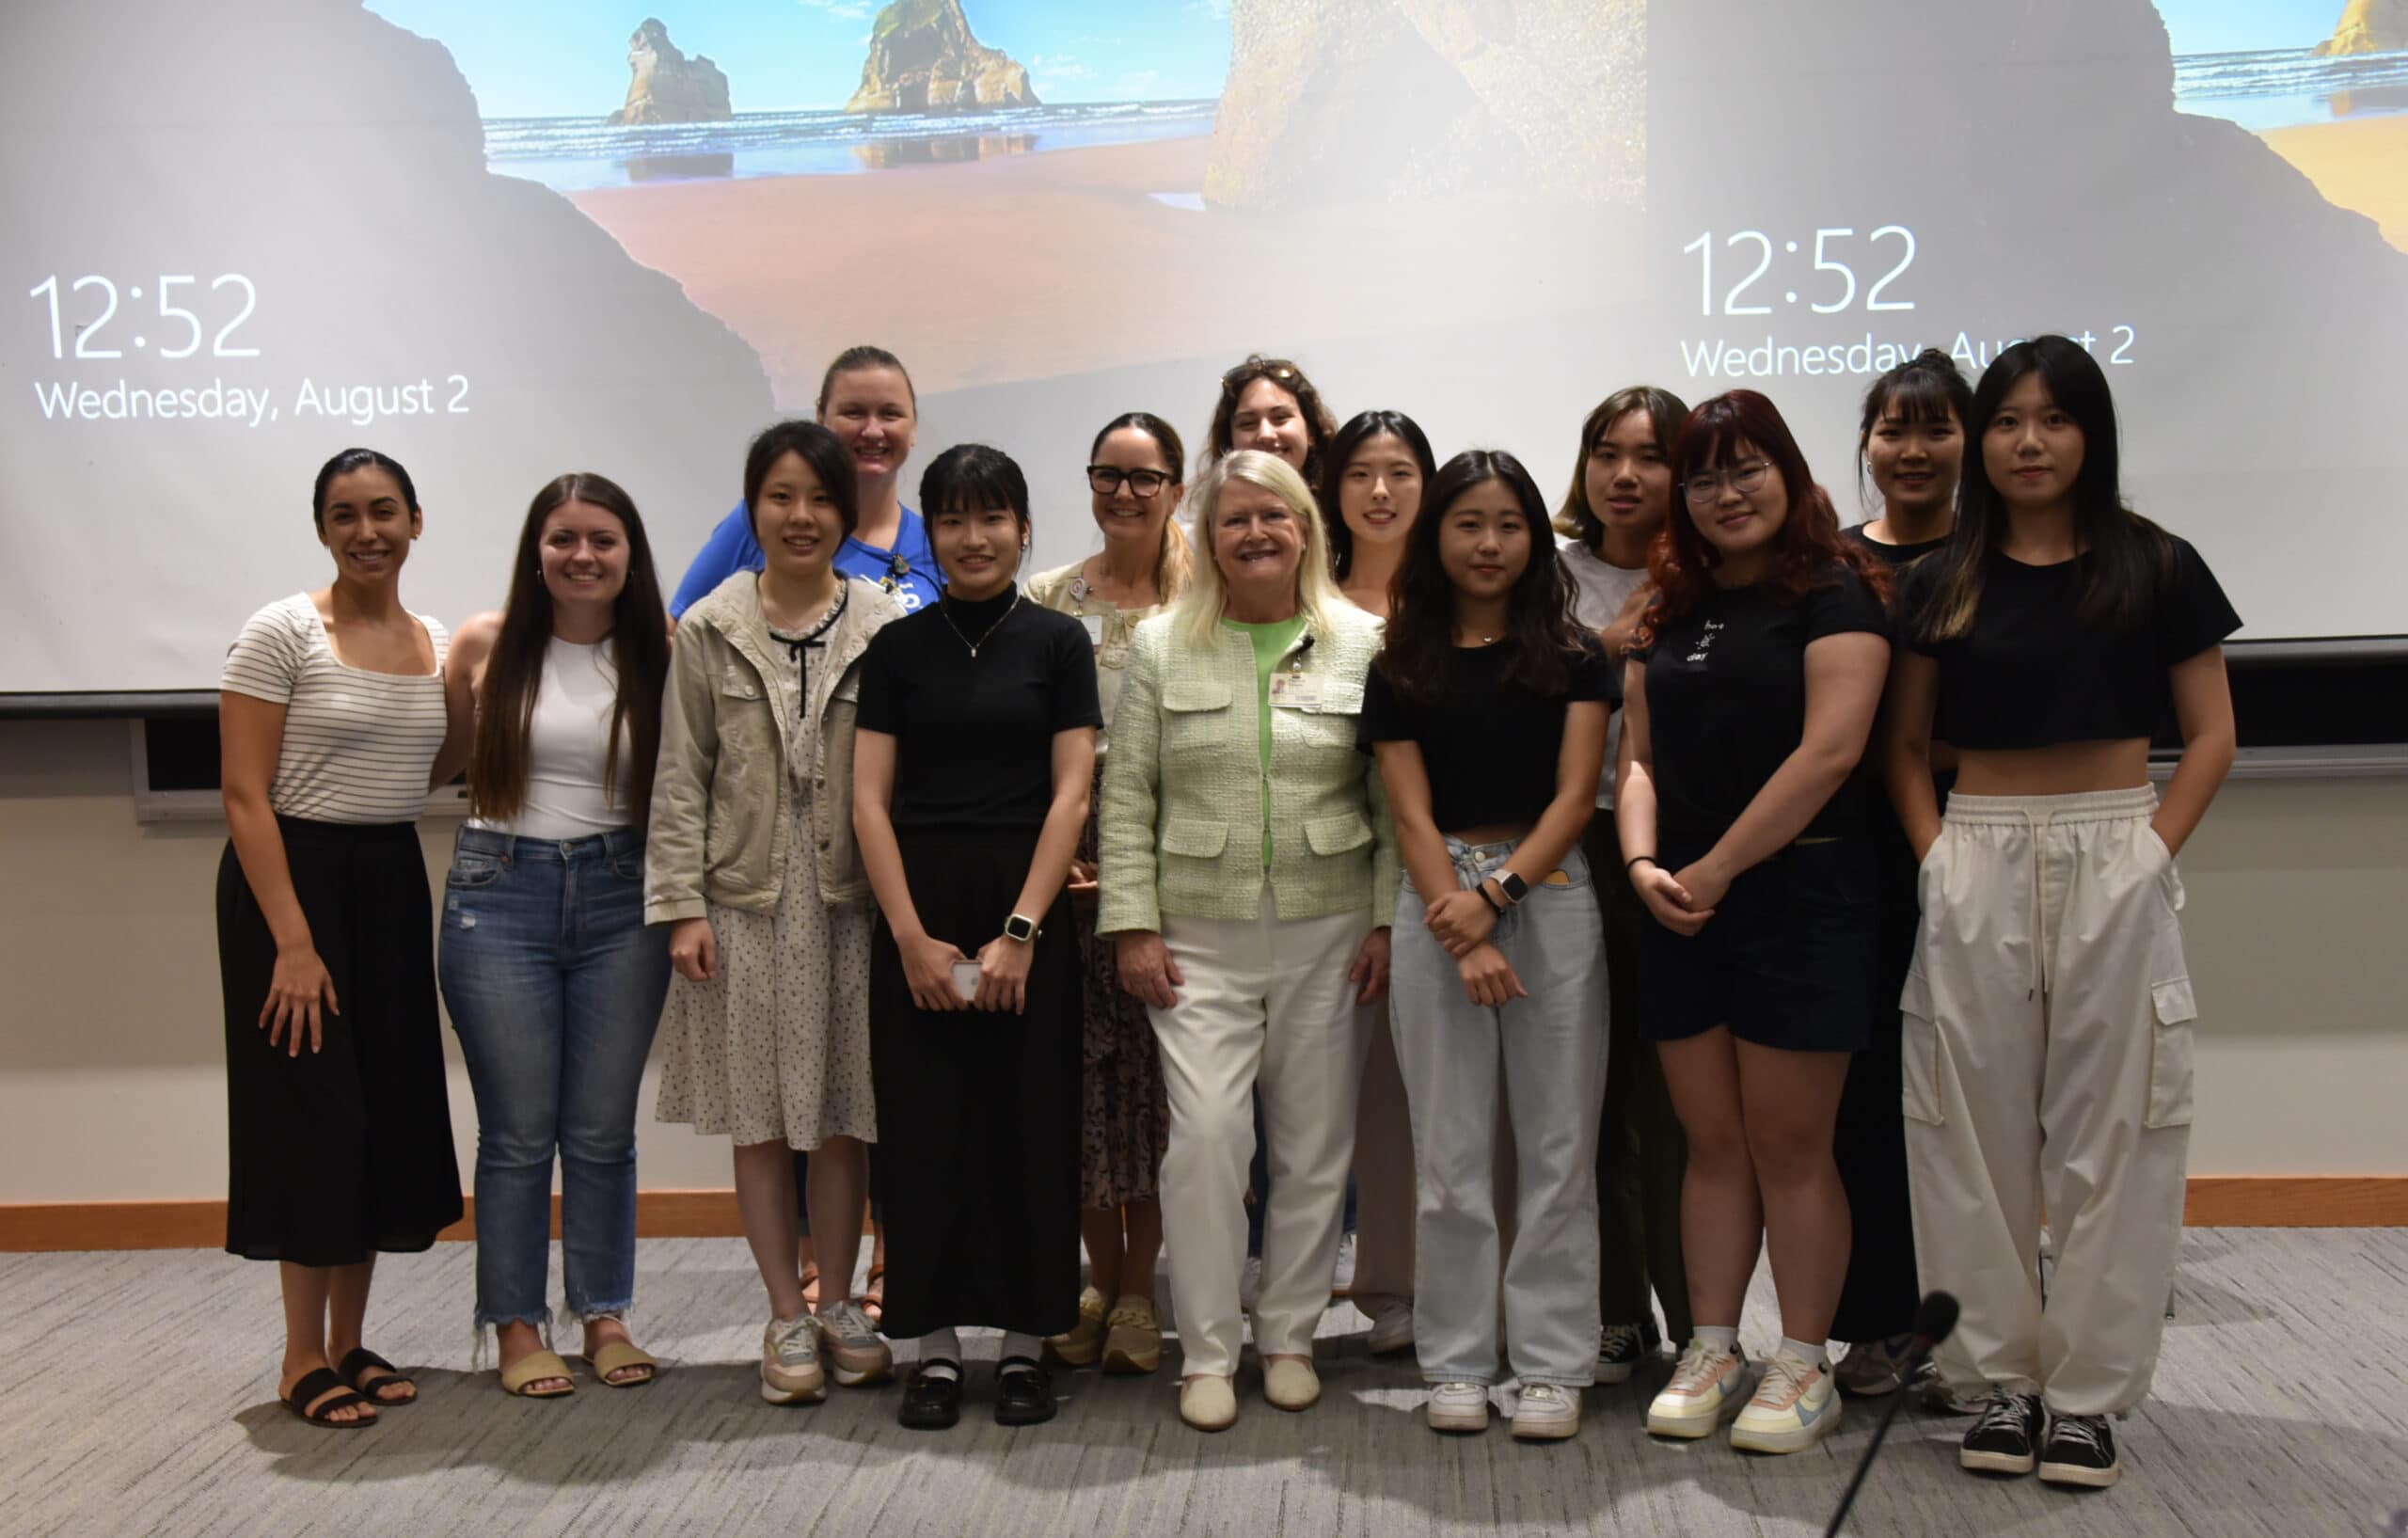 Students and faculty members from the UAMS College of Nursing stand with the exchange students from Taiwan’s Kaohsiung Medical University.